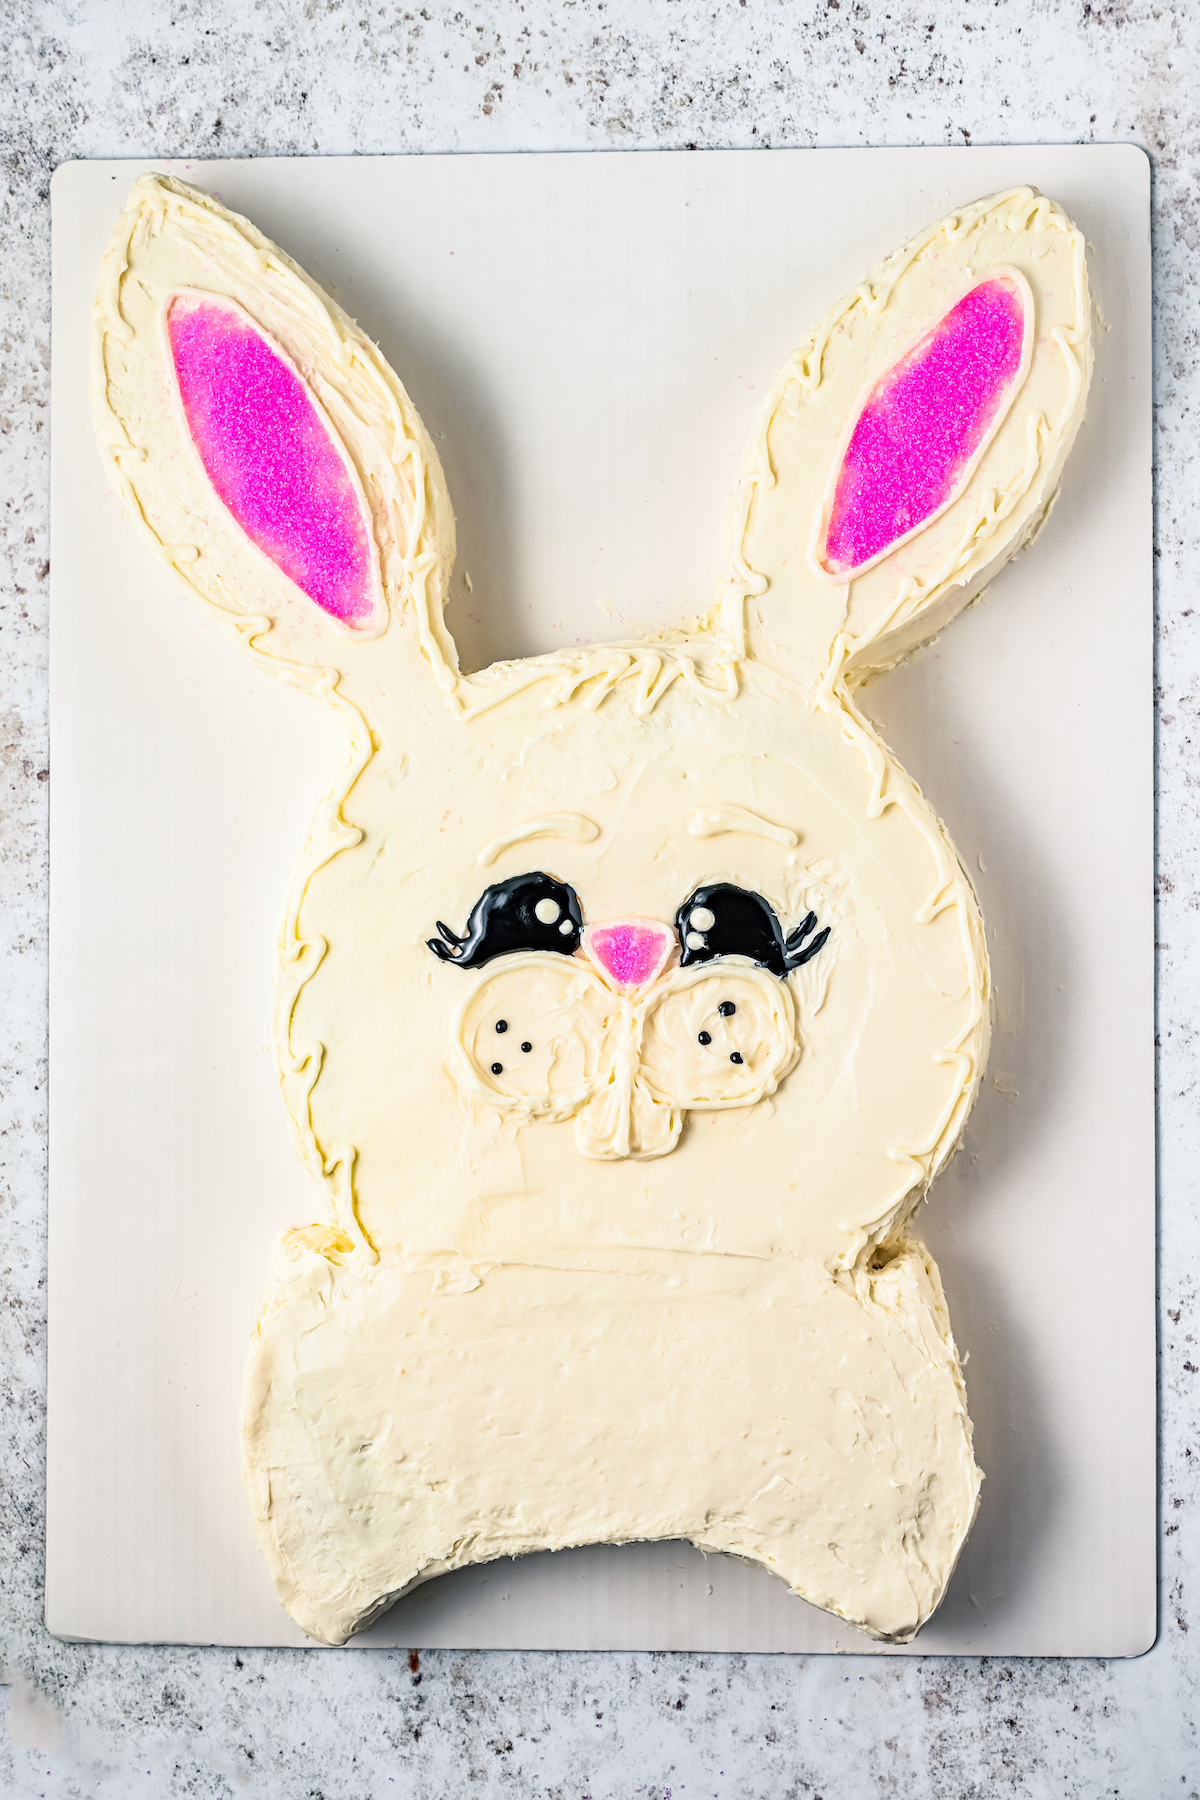 A bunny cake with ears, eyes, nose, teeth, and whiskers.